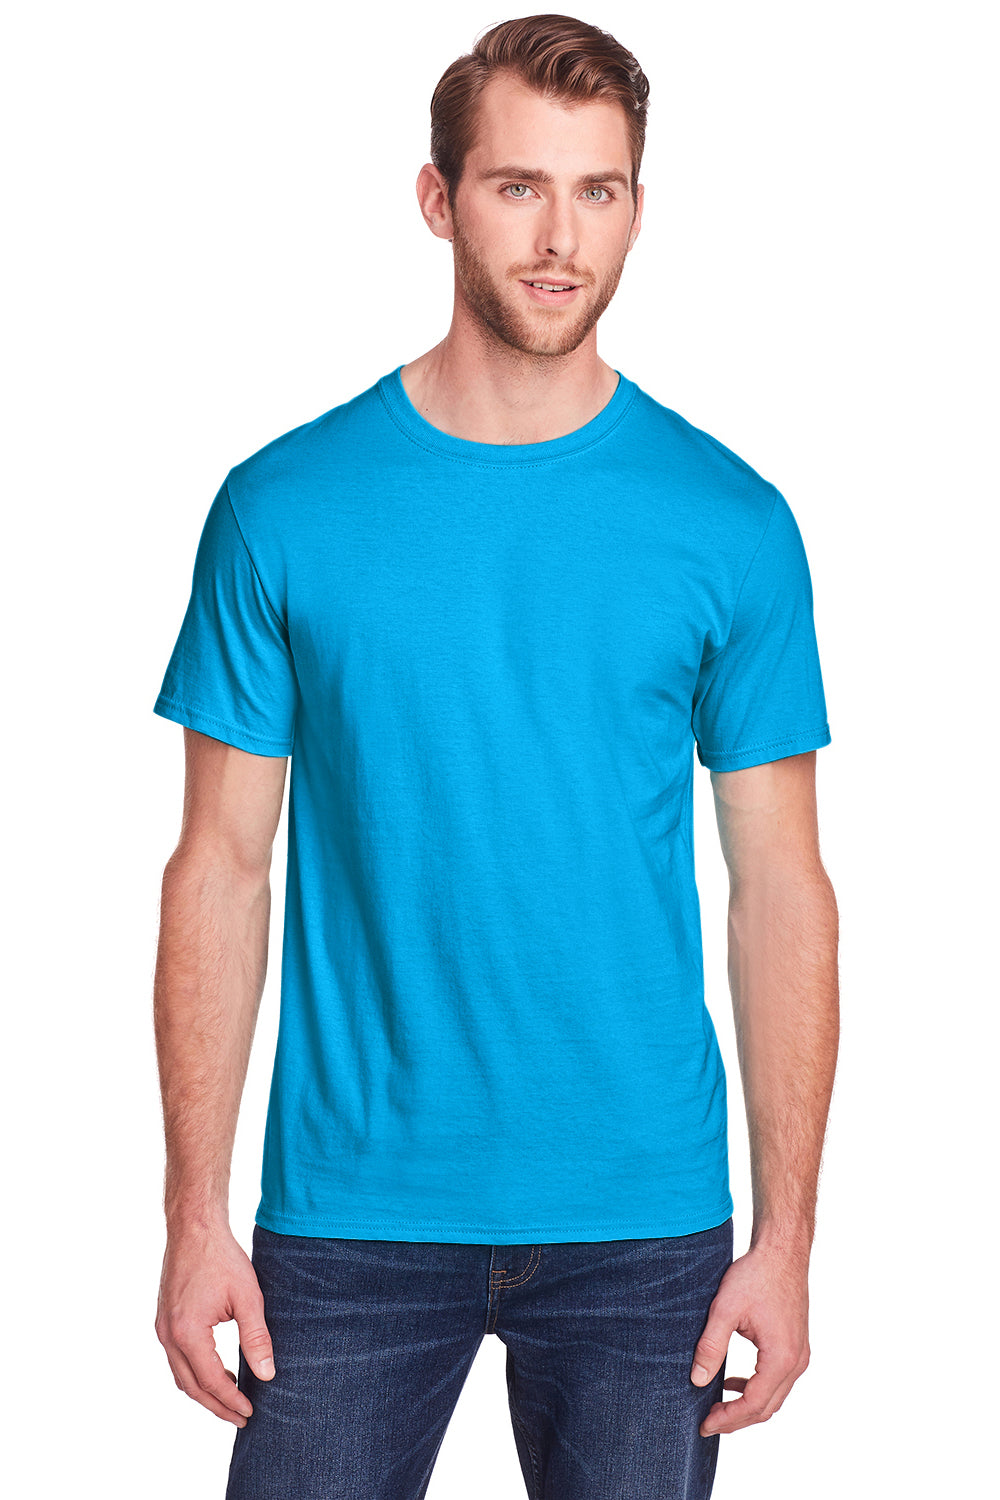 Fruit Of The Loom IC47MR Mens Iconic Short Sleeve Crewneck T-Shirt Pacific Blue Front